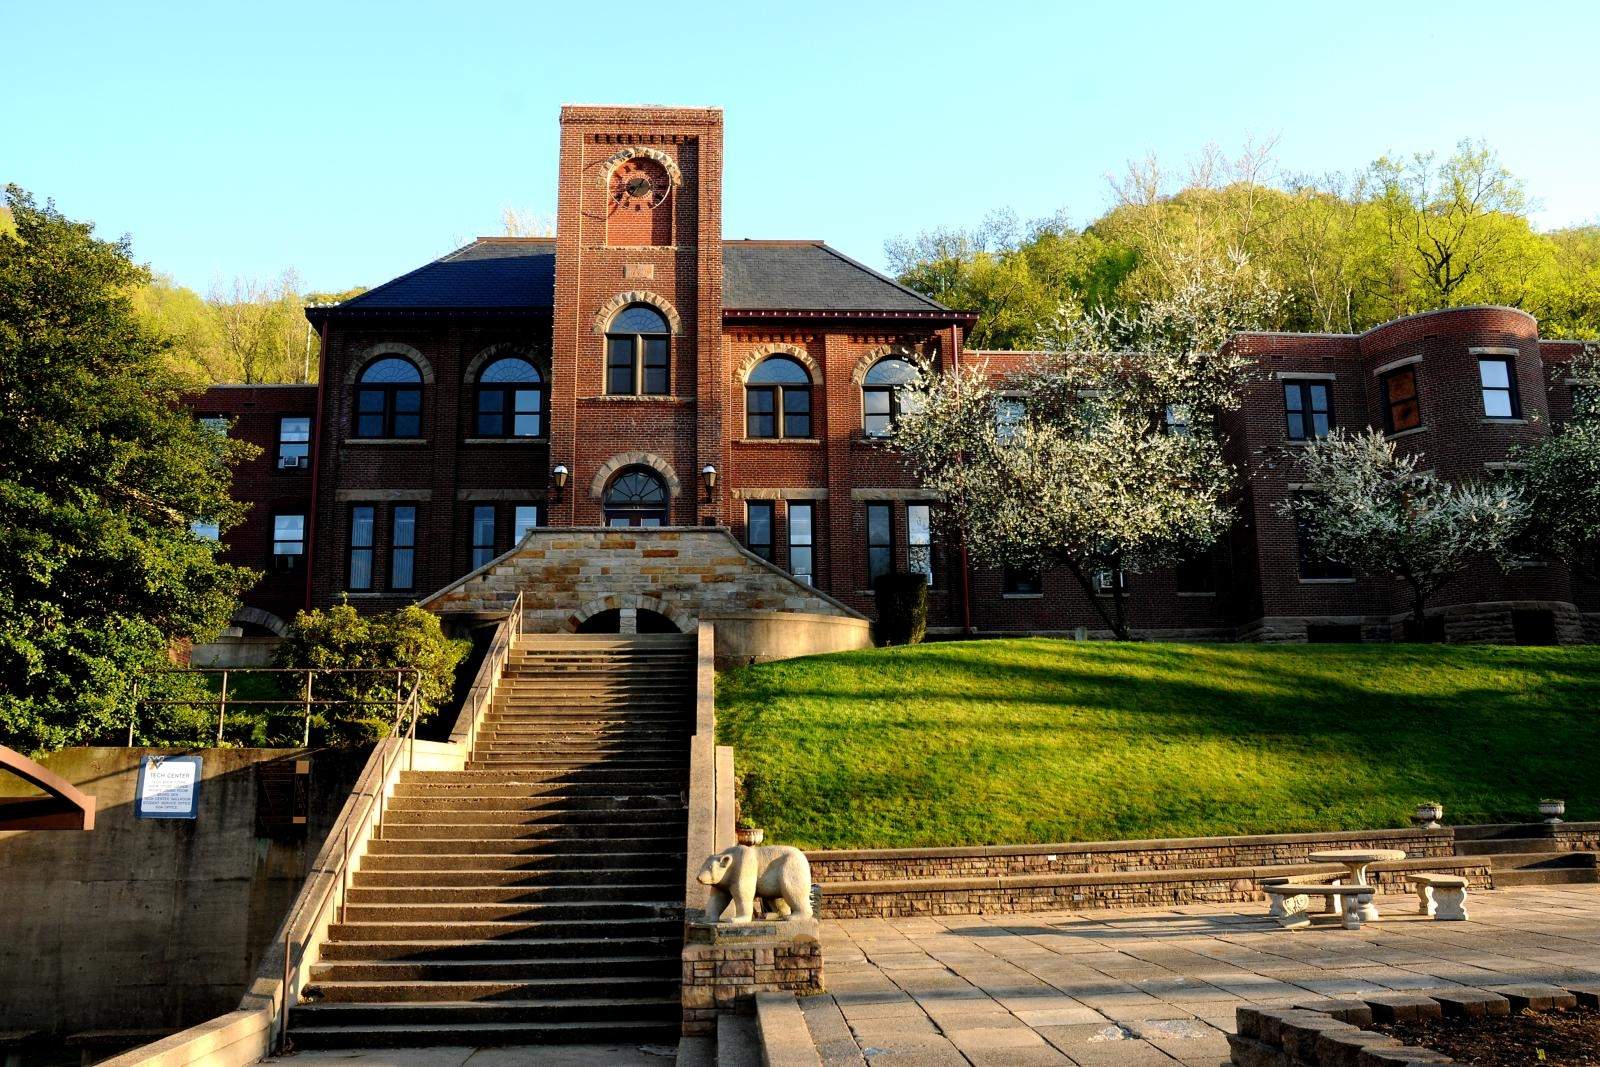 WVU Tech dates back to a college preparatory school established in 1895. In 2015, WVU administrators announced plans to transfer the school to Beckley. 